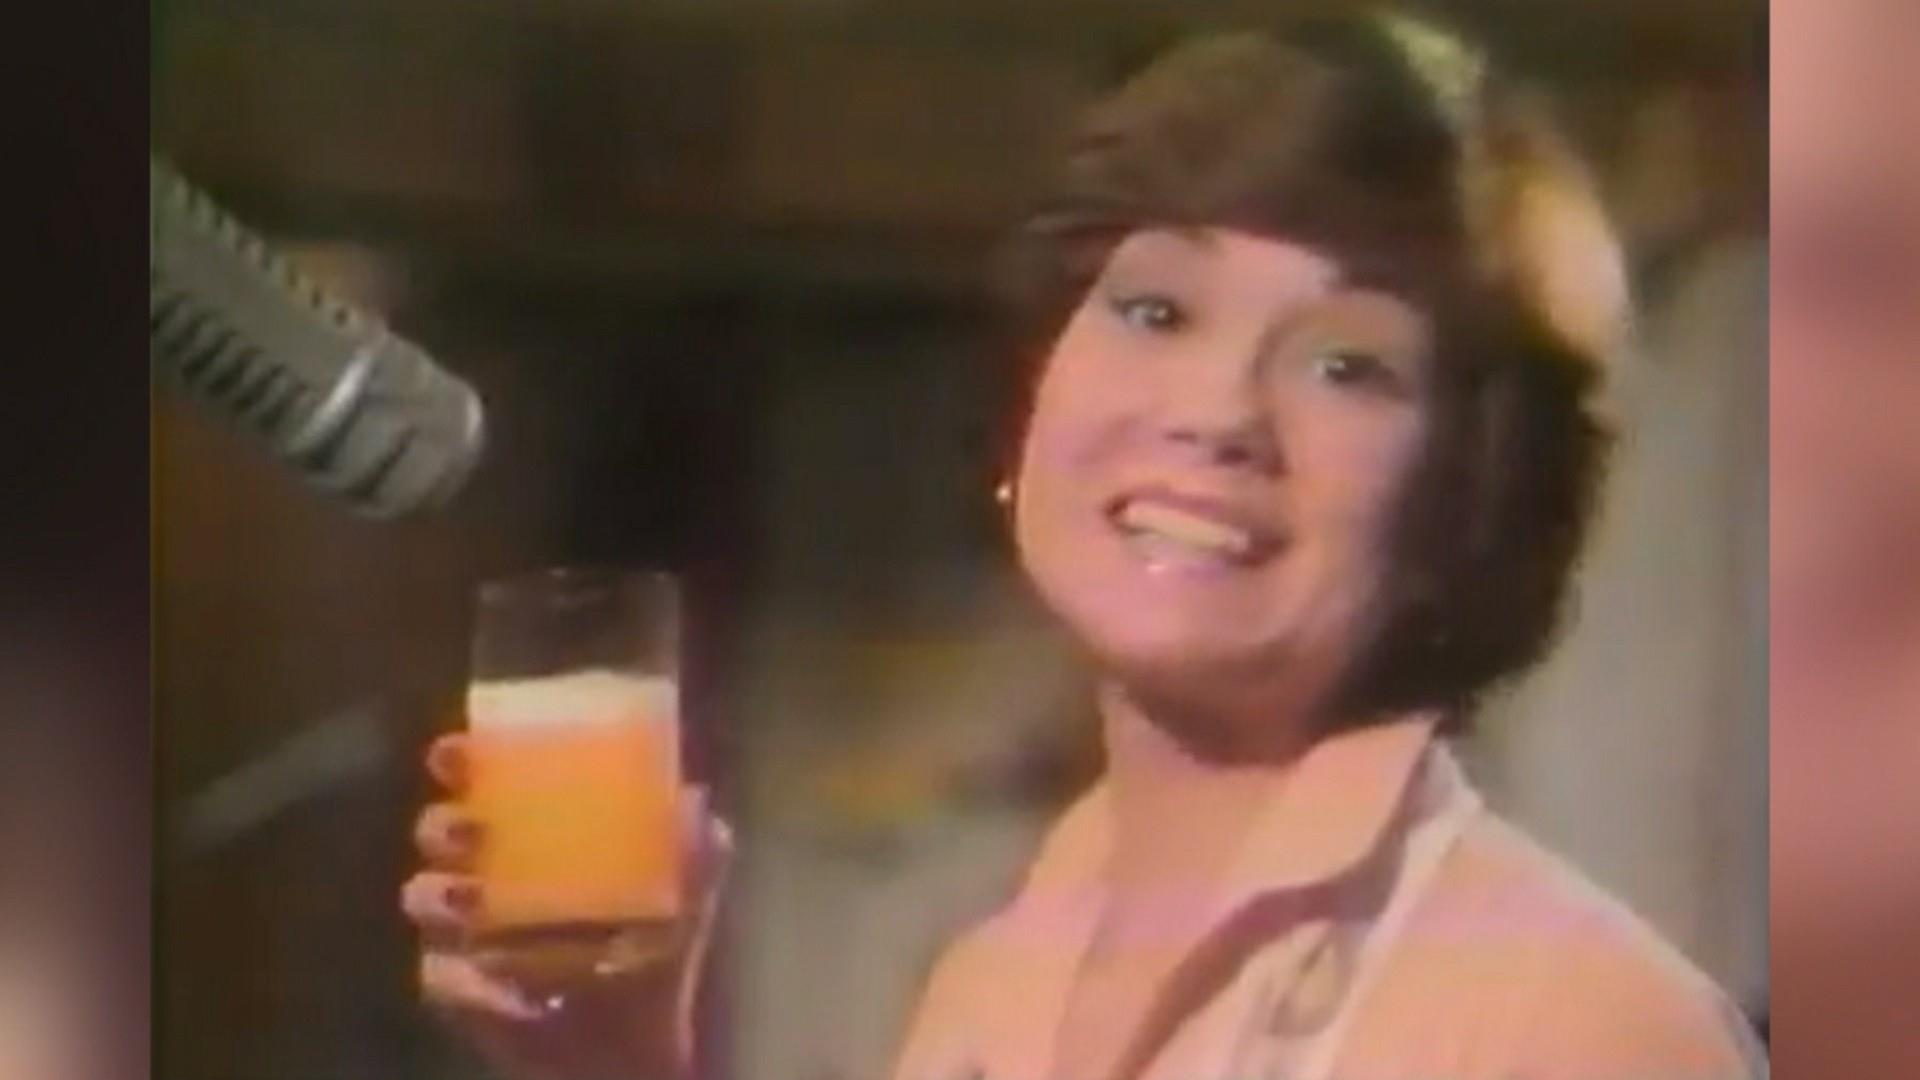 Flashback! See Kathie Lee Gifford in a 1979 juice commercial